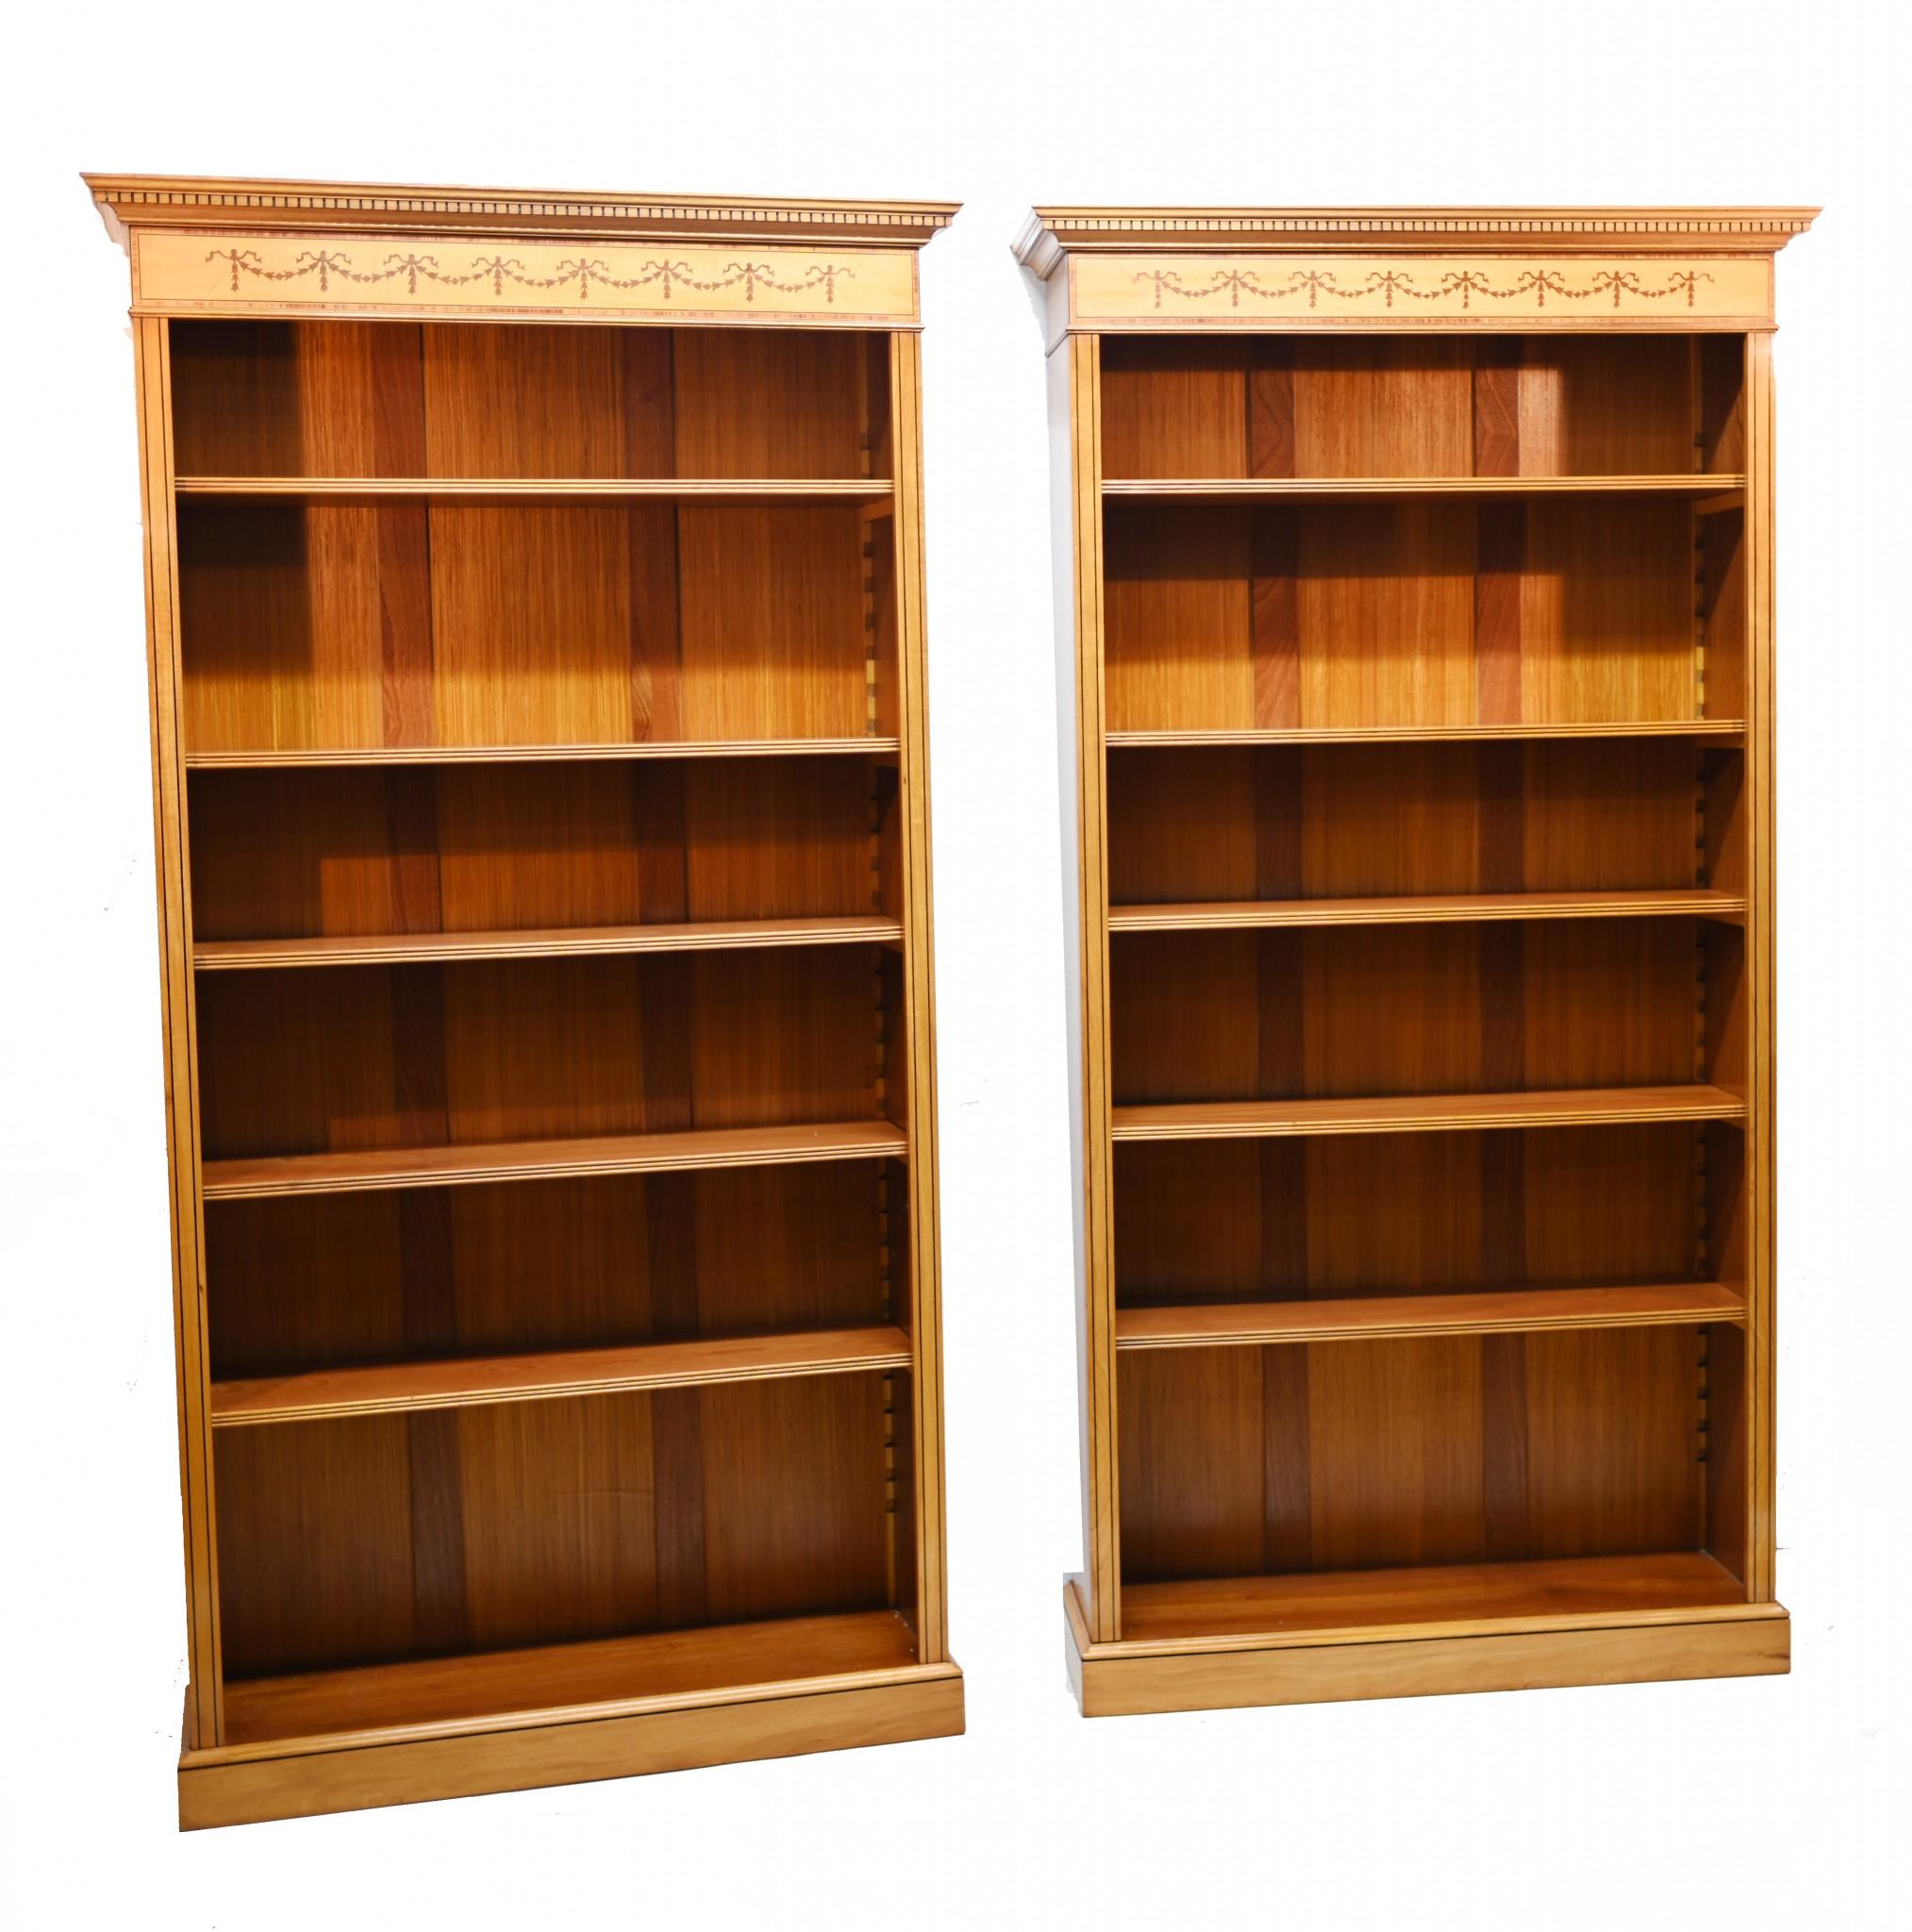 Stunning pair of English Regency style bookcases in gorgeous satinwood
We normally have similar bookcases in mahogany so it was a joy to find these in satinwood - perfect for modern interiors
Bookcases feature intricate marquetry inlay in the shape